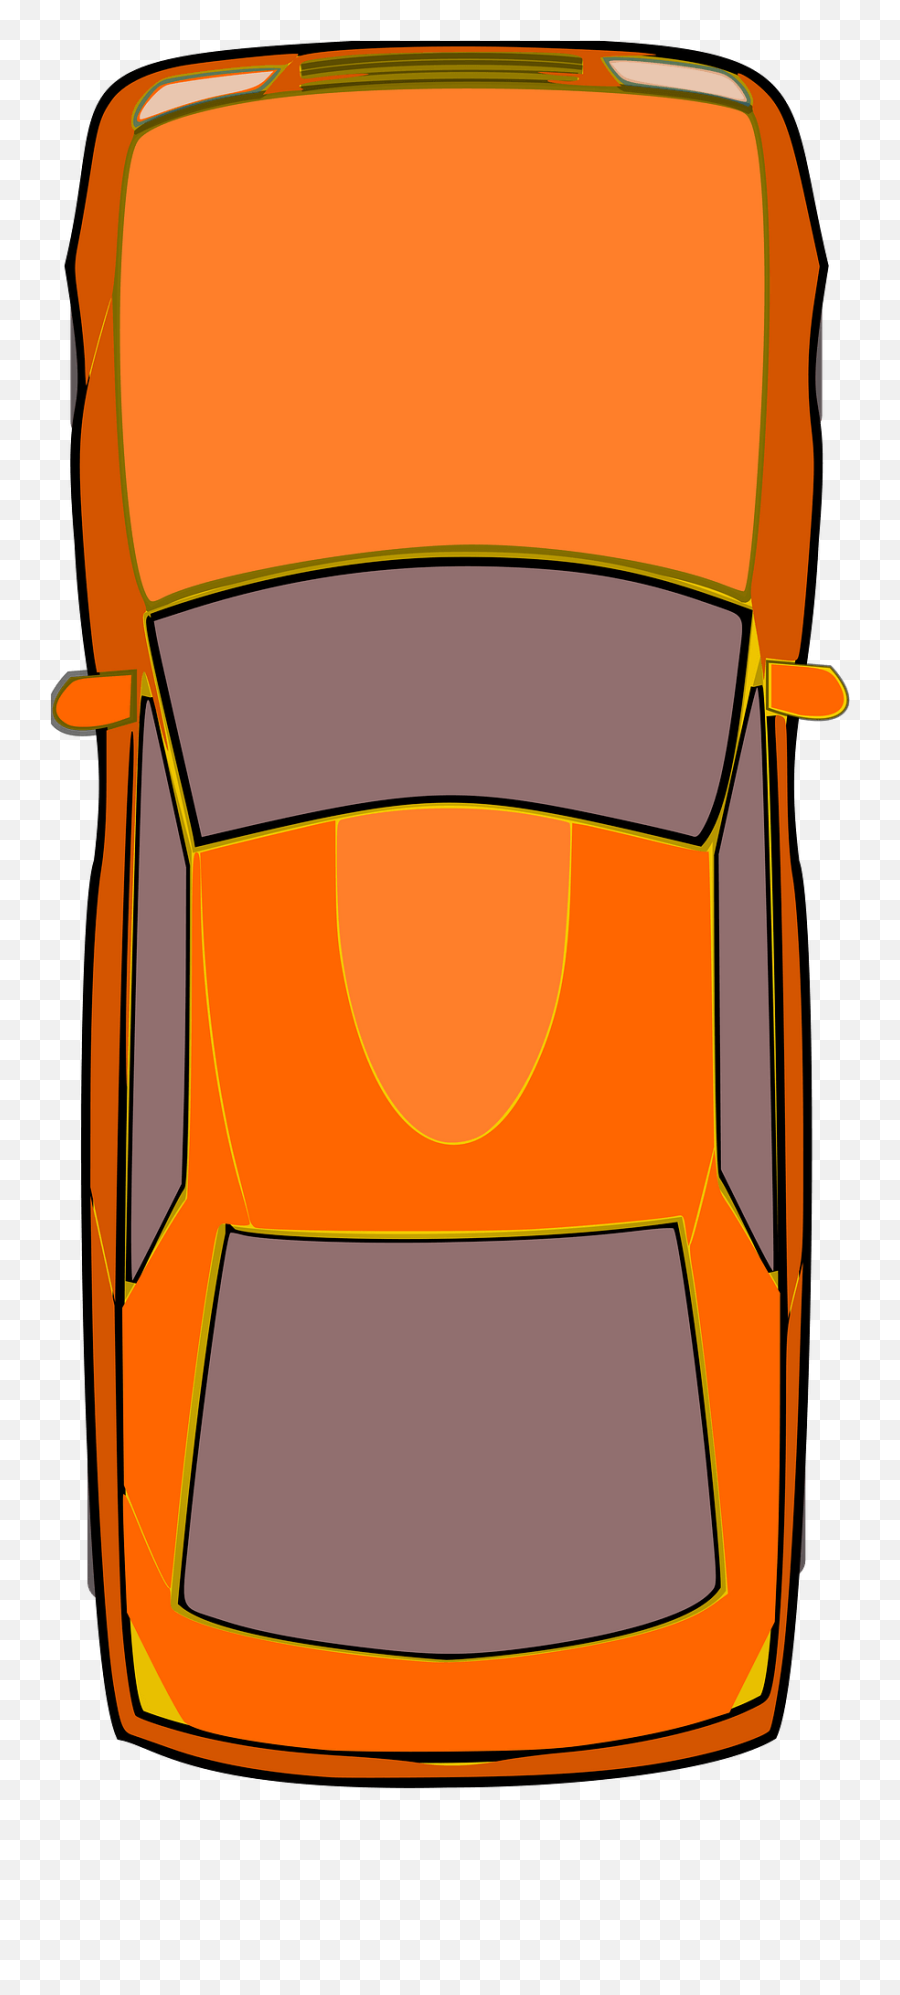 Top View Of Orange Car Clipart Free Download Transparent Png Down Icon